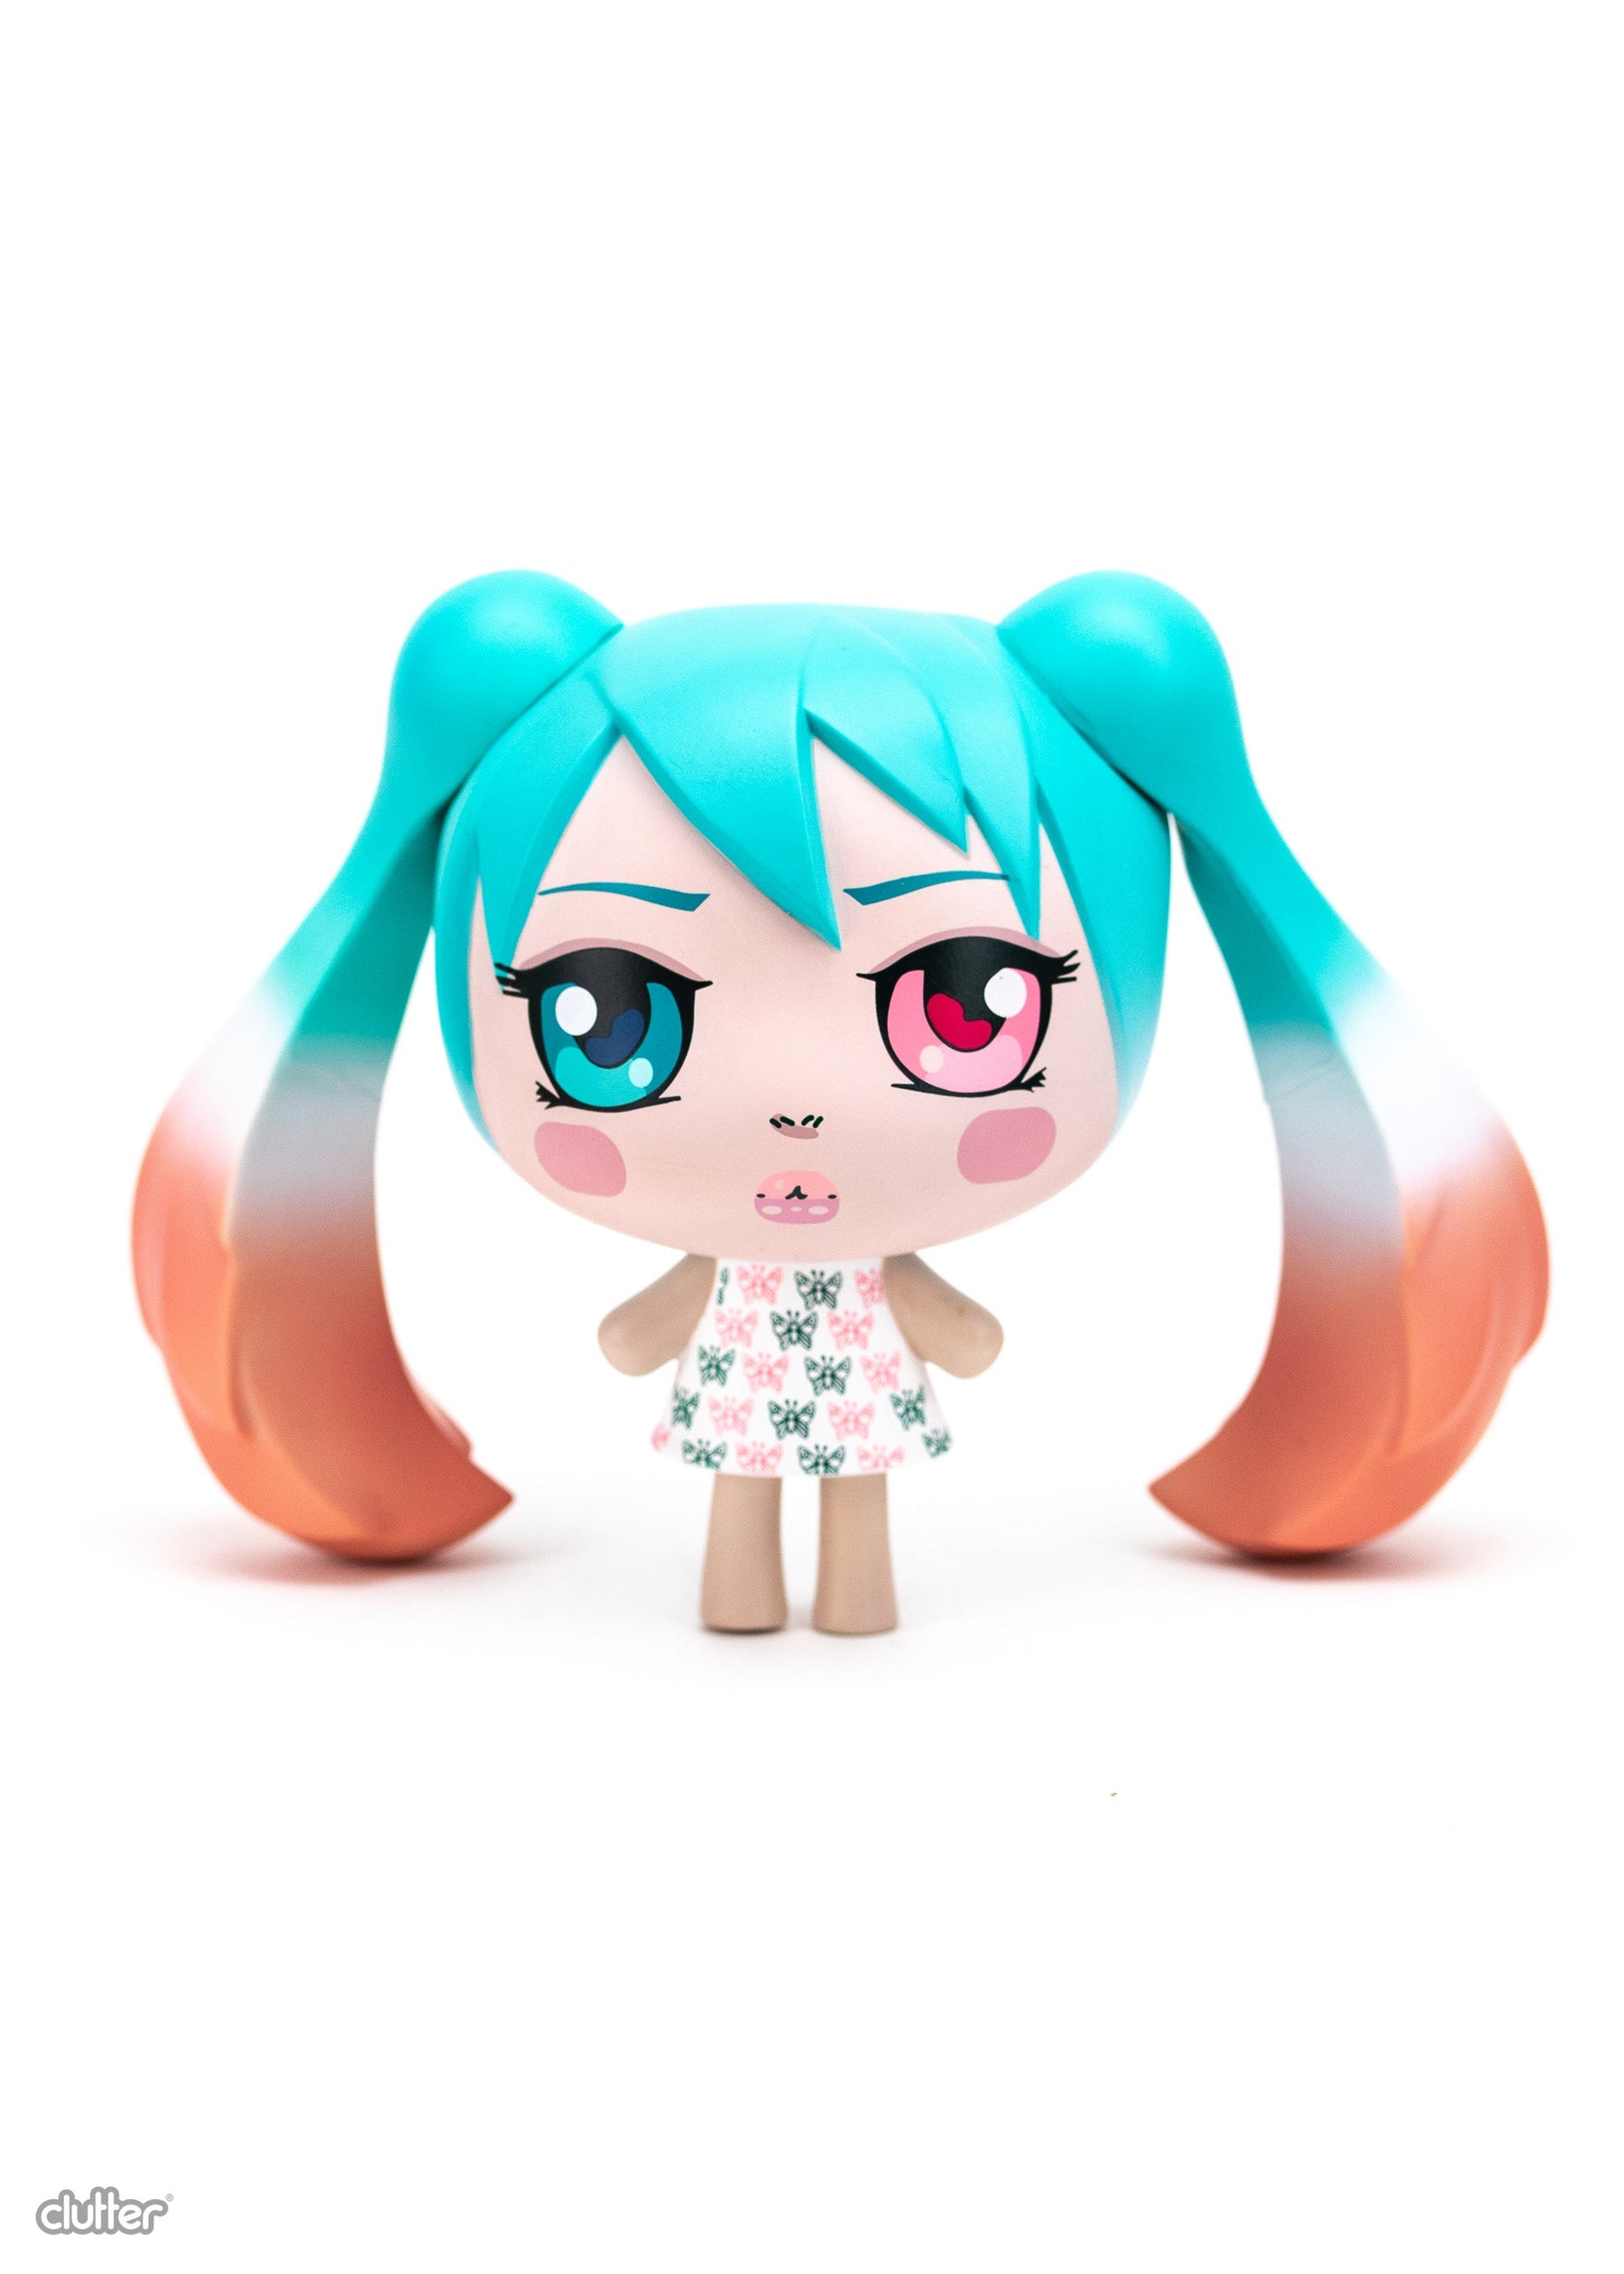 O-Miku ButterFly Colorway 5.5-inch vinyl figure by Camilla d’Errico x Clutter Studios Available Now ! ! !